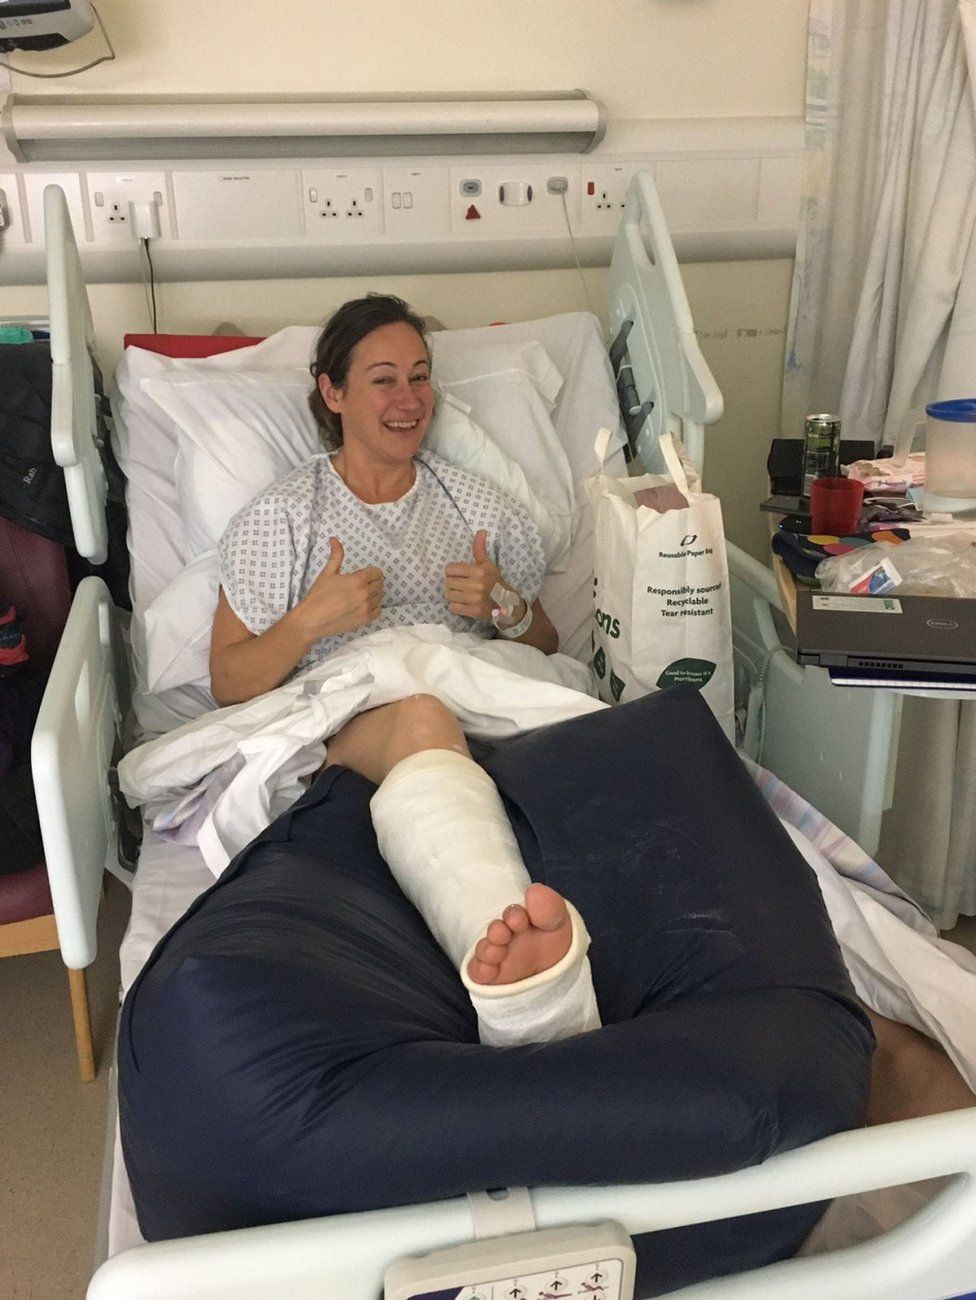 Claire Hughes giving a "thumbs-up" signal from her hospital bed